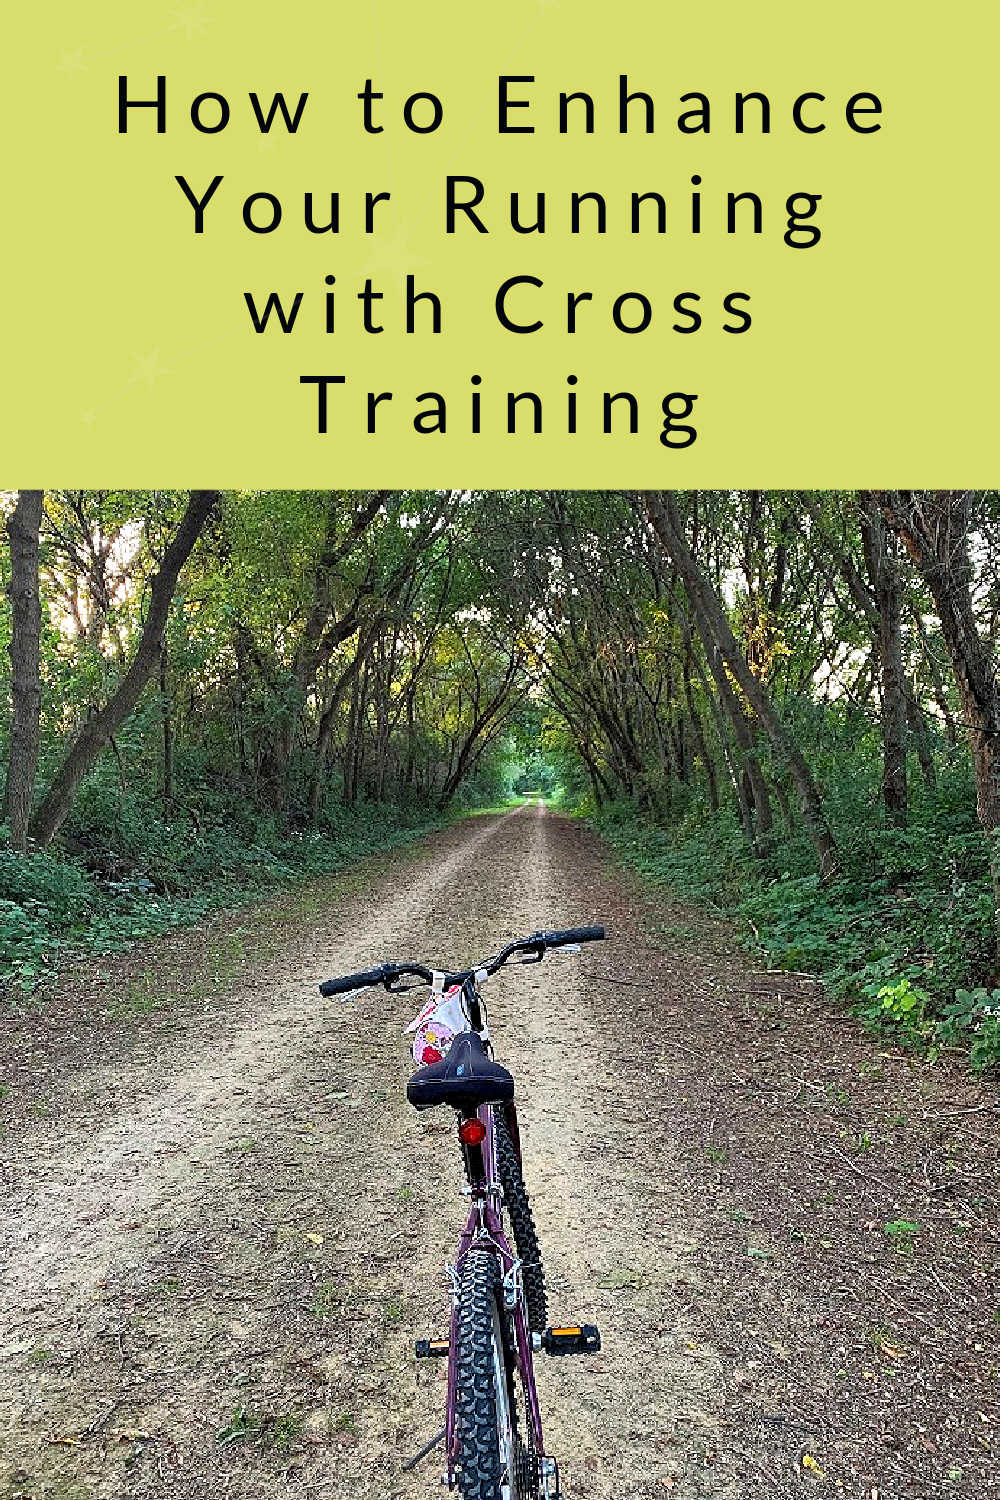 How to Enhance Your Running with Cross Training